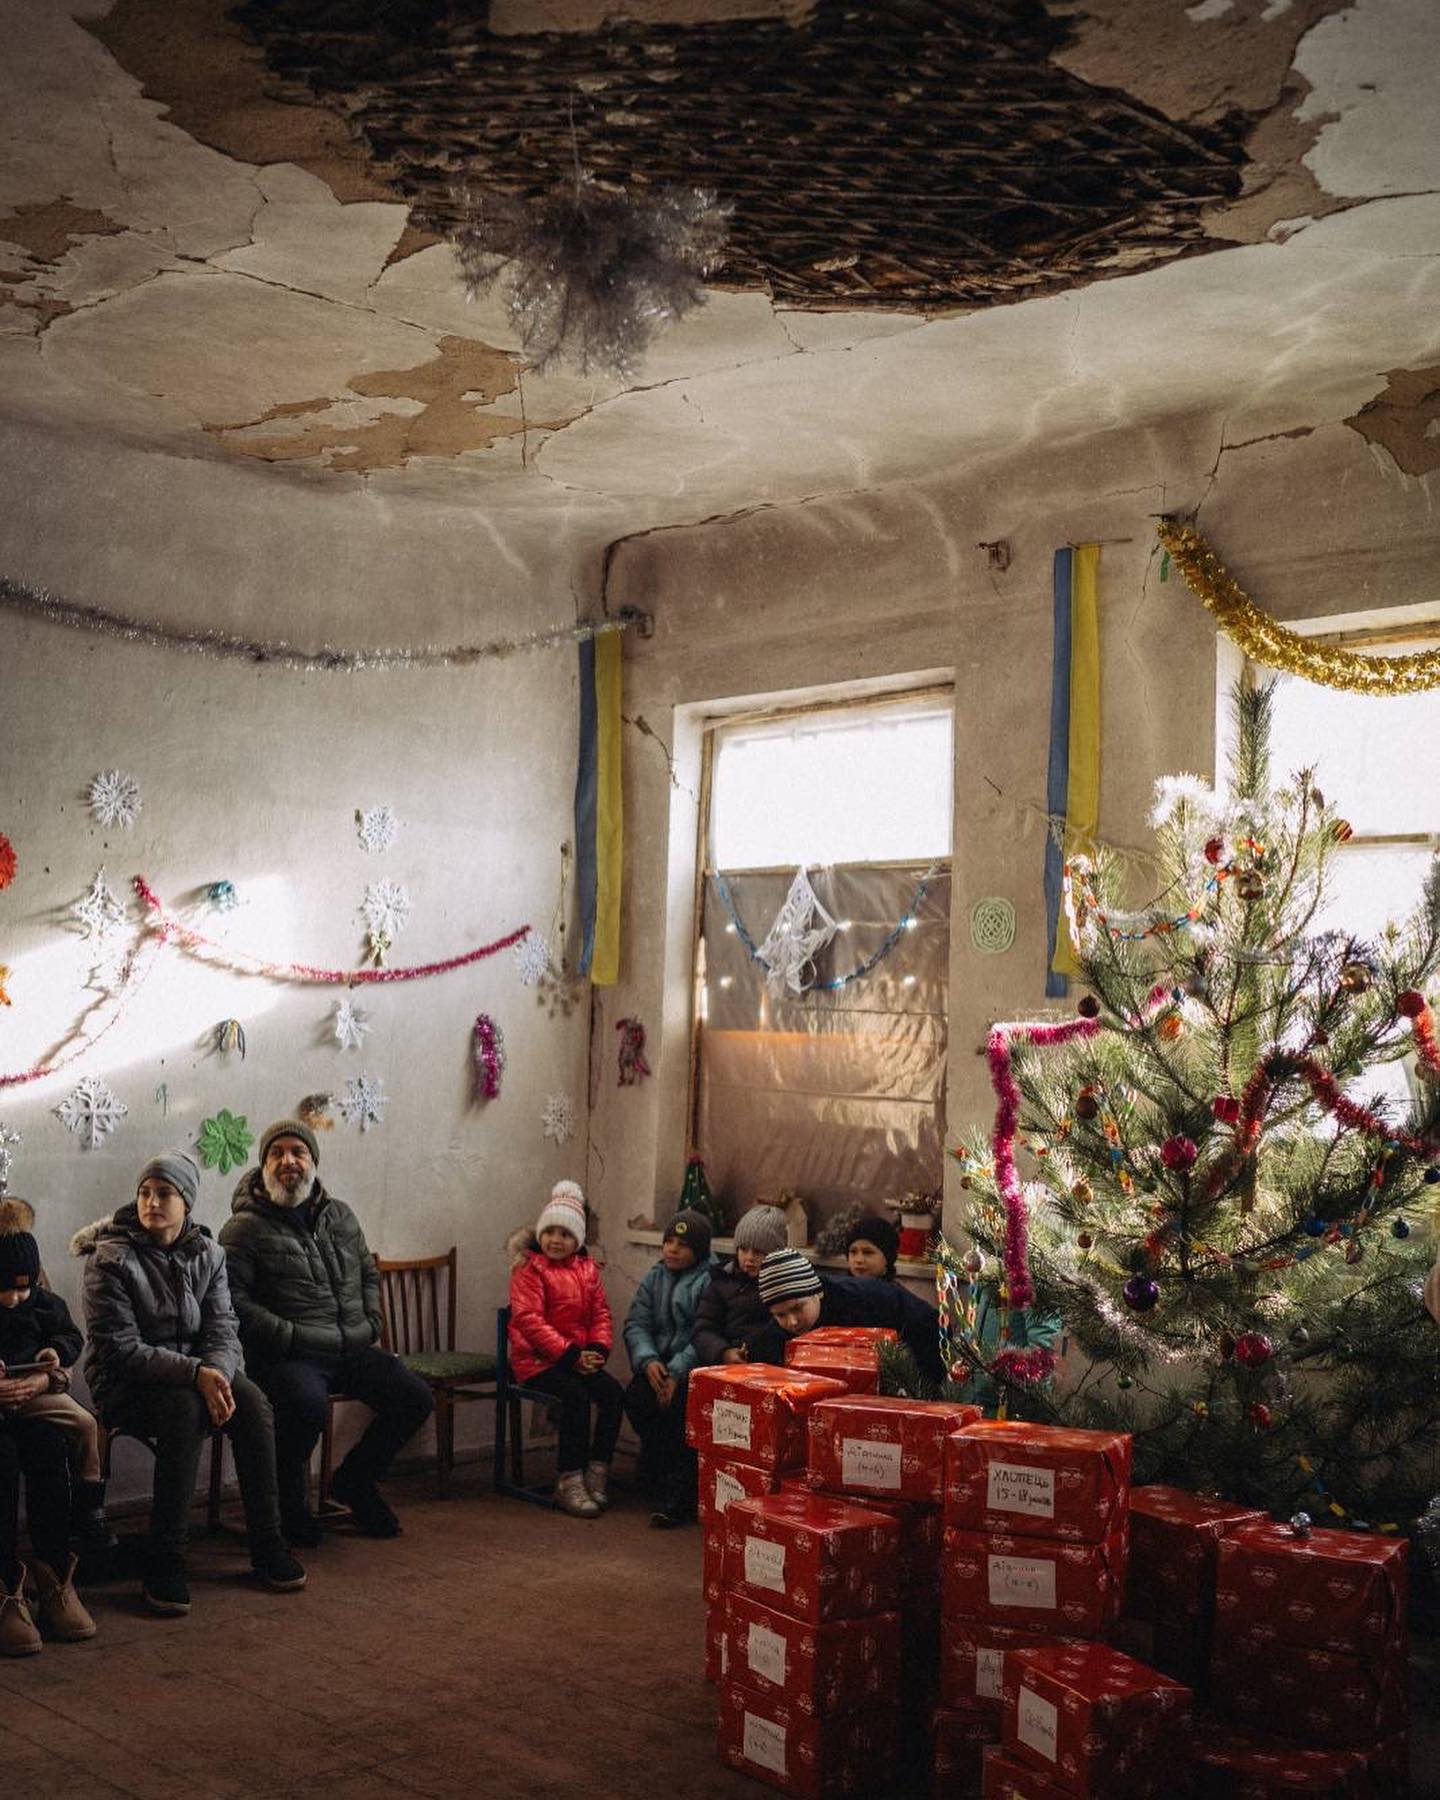 A group of people sitting around a christmas tree in a room.